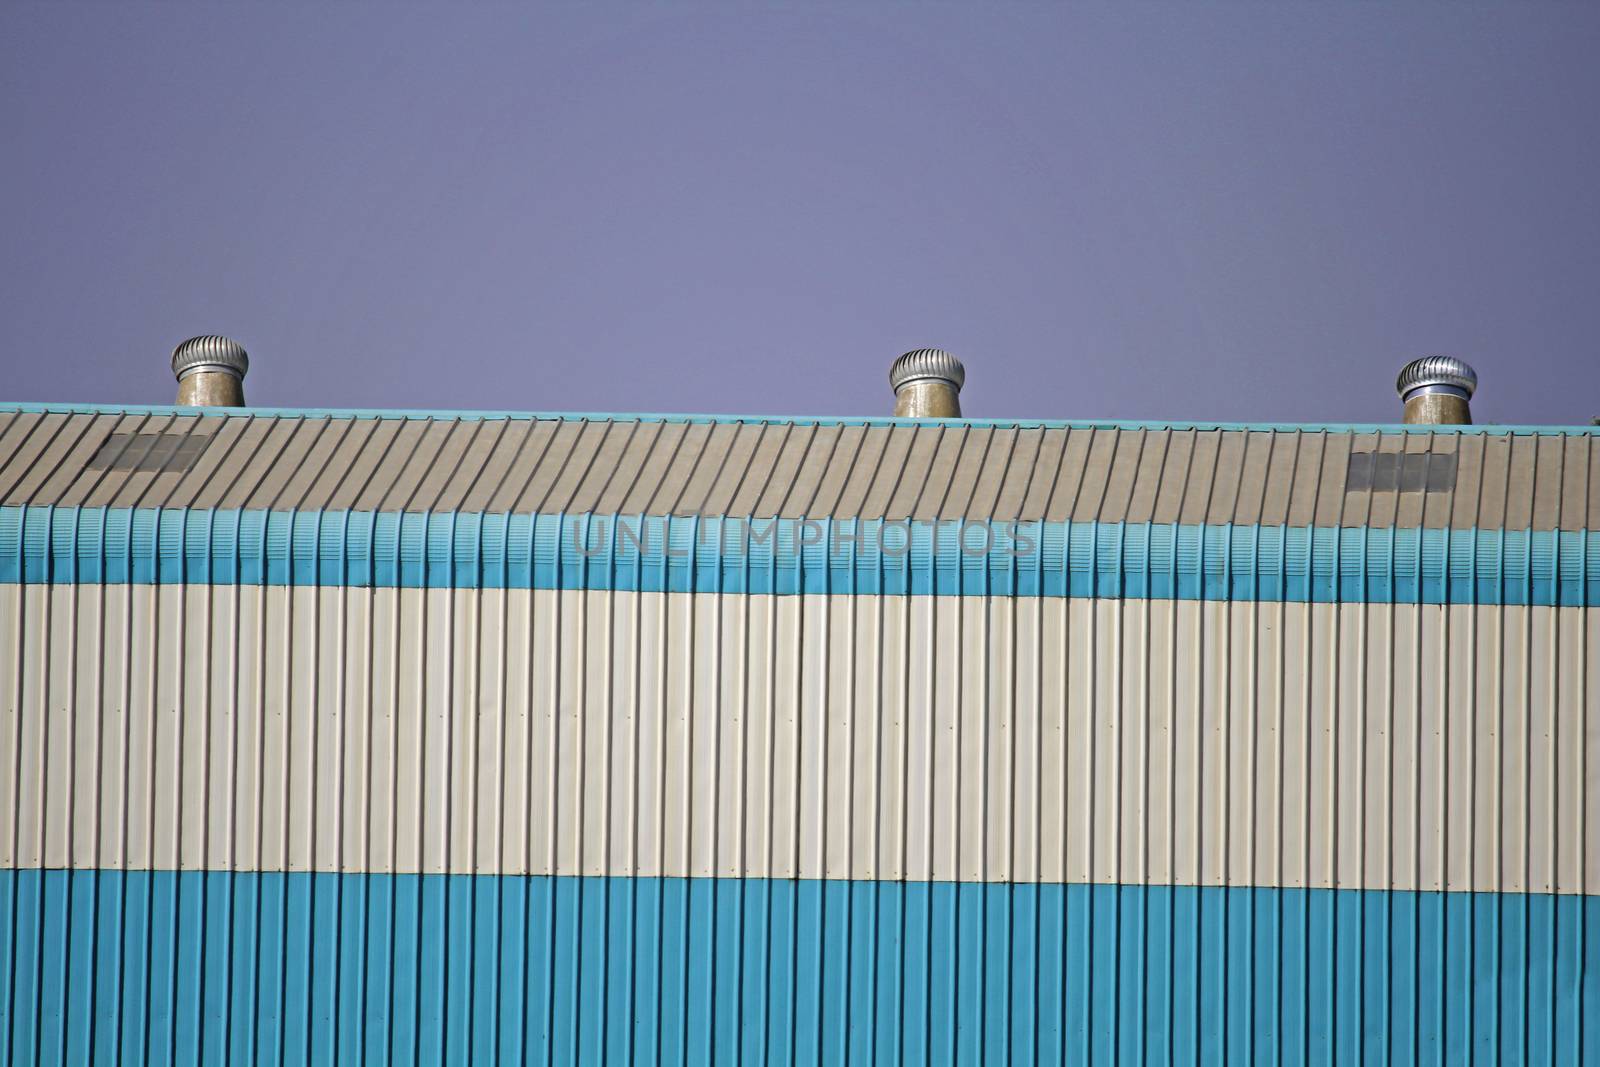 Air exhaust ventilation system by yands